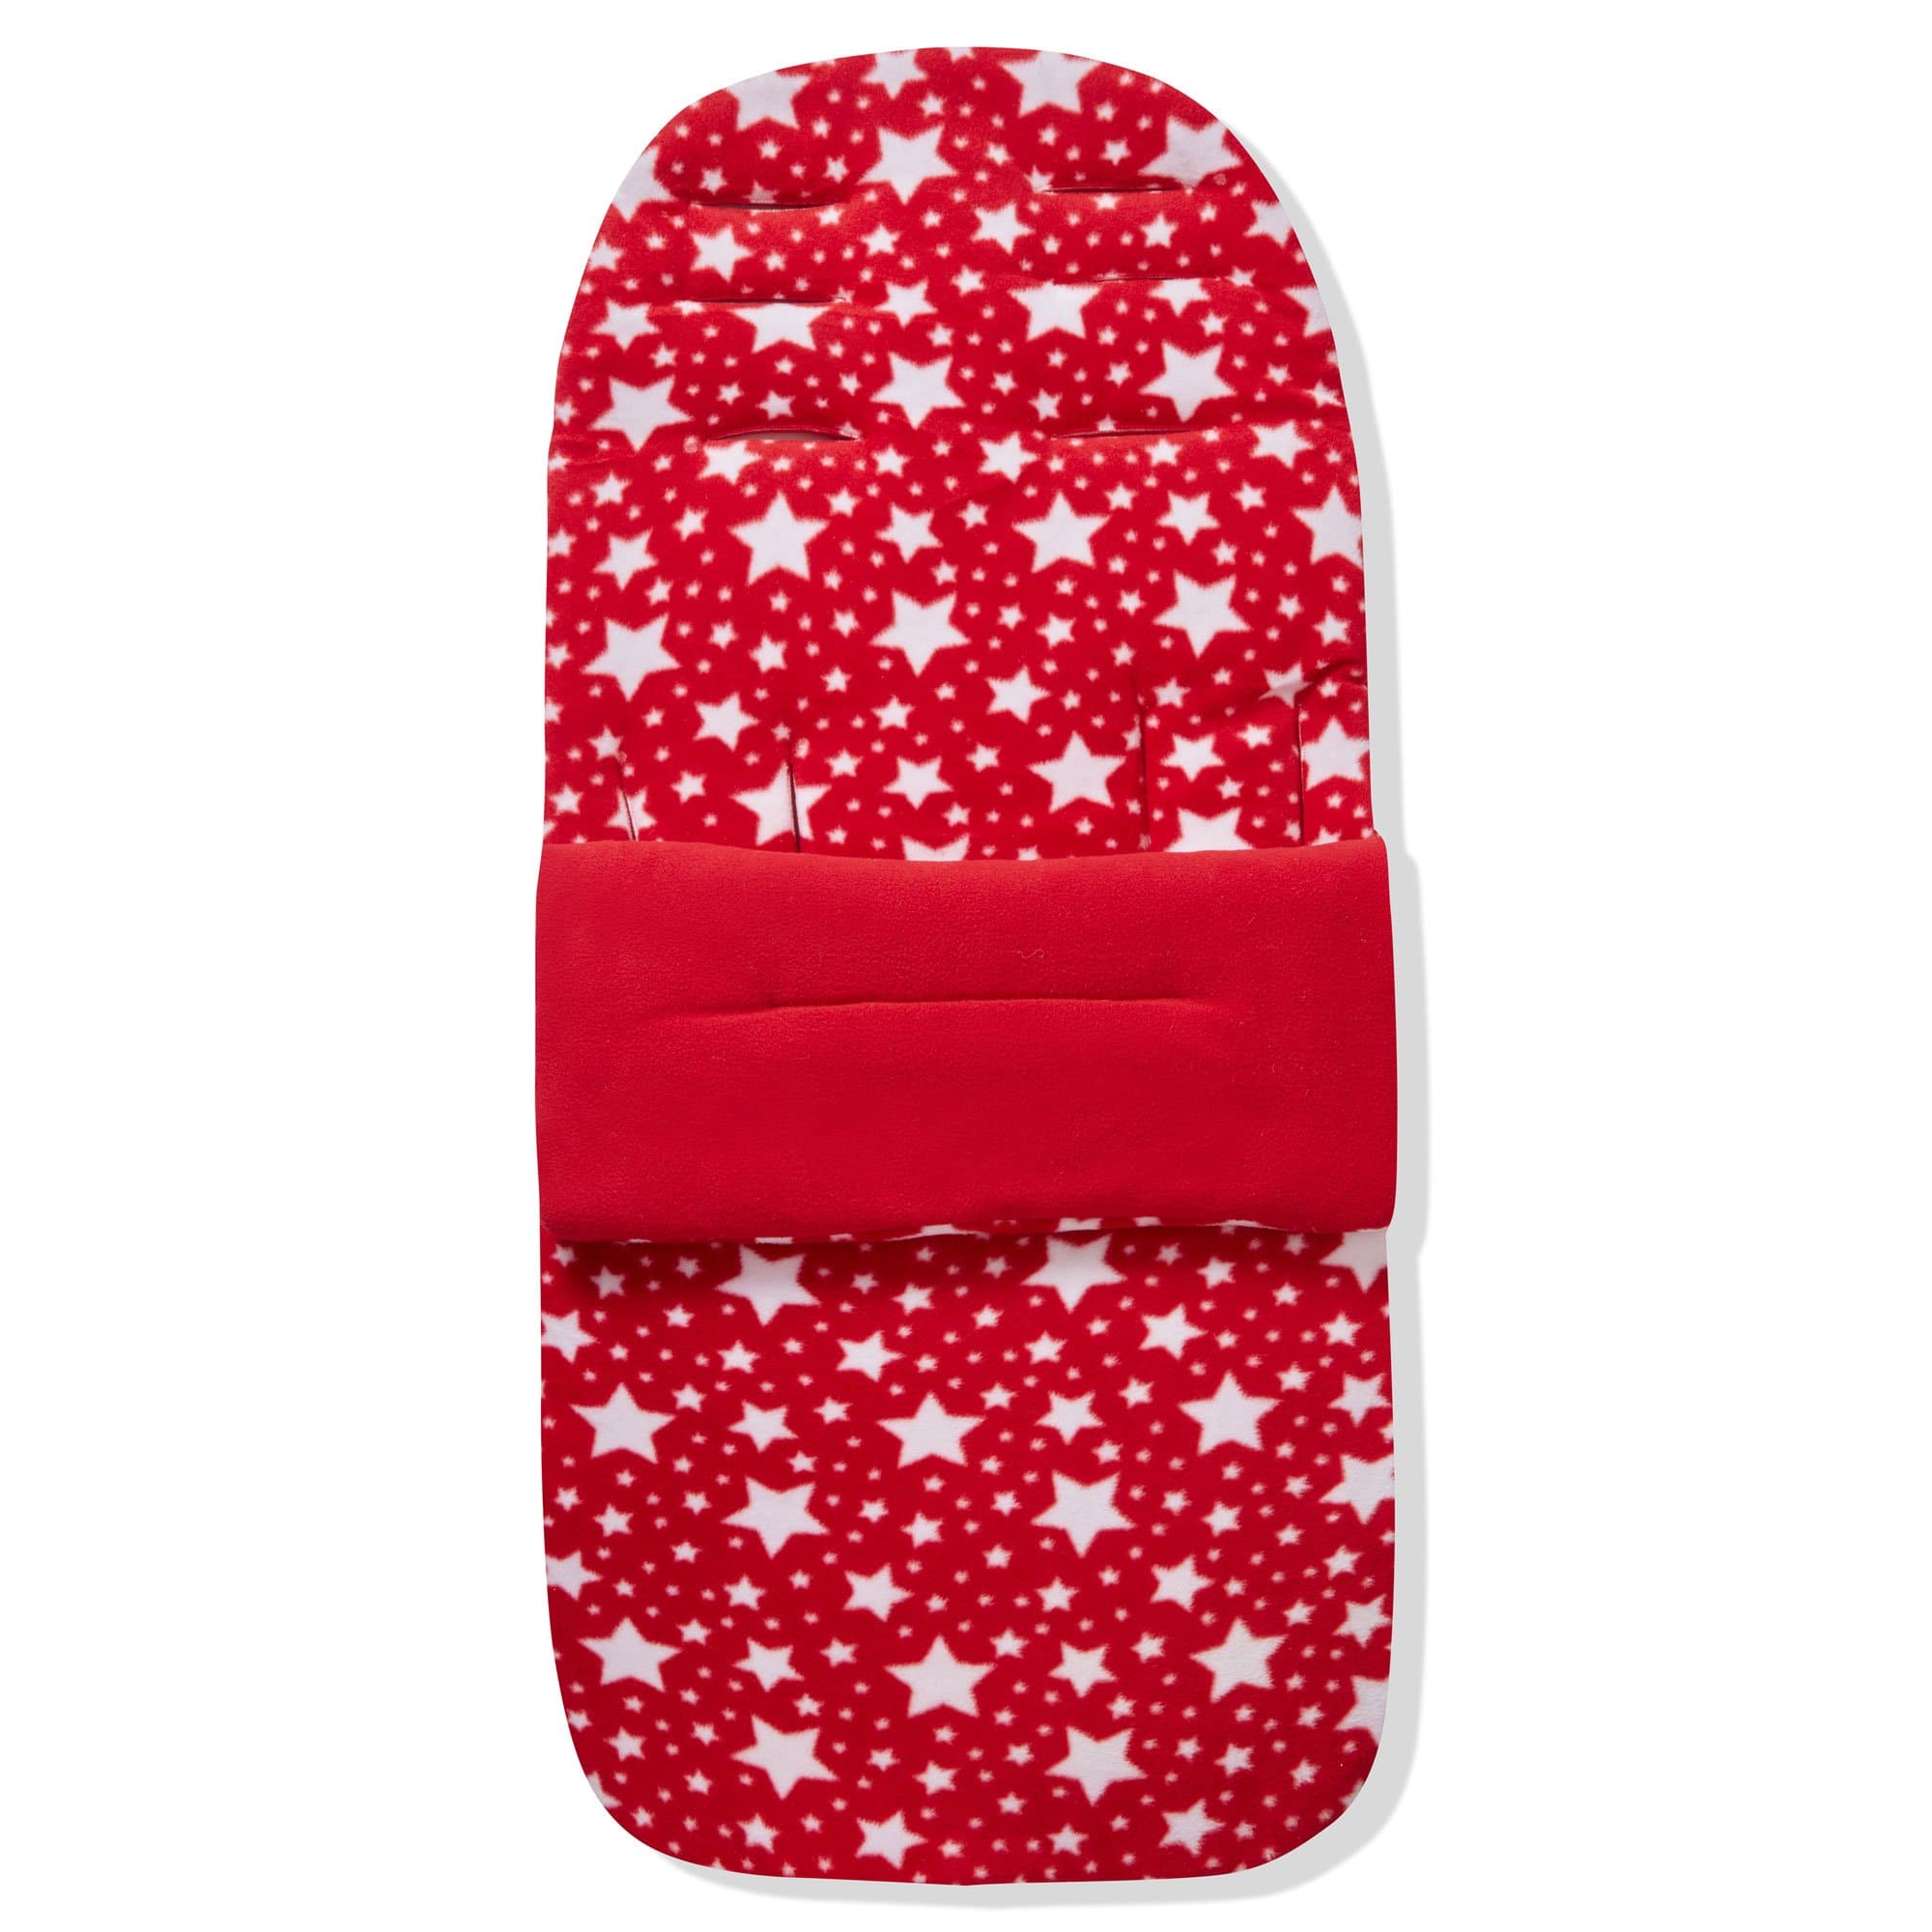 Fleece Footmuff / Cosy Toes Compatible with Mee-Go - Red Star / Fits All Models | For Your Little One